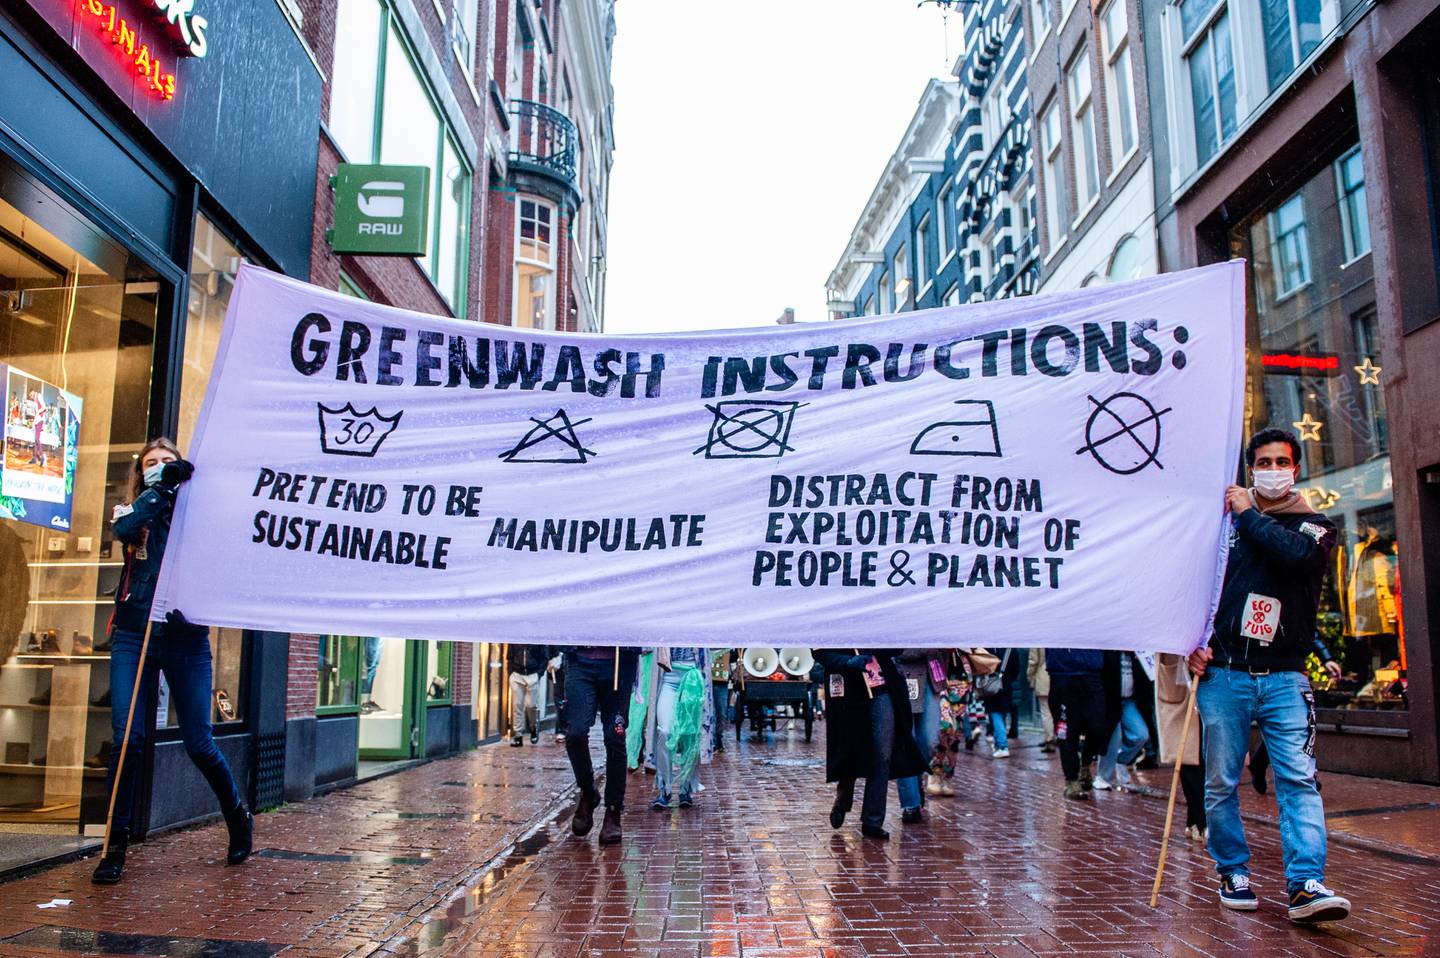 XR activists hold a banner showing a clothing care label with the headline "Greenwash Instructions" during a protest in Amsterdam in 2021.